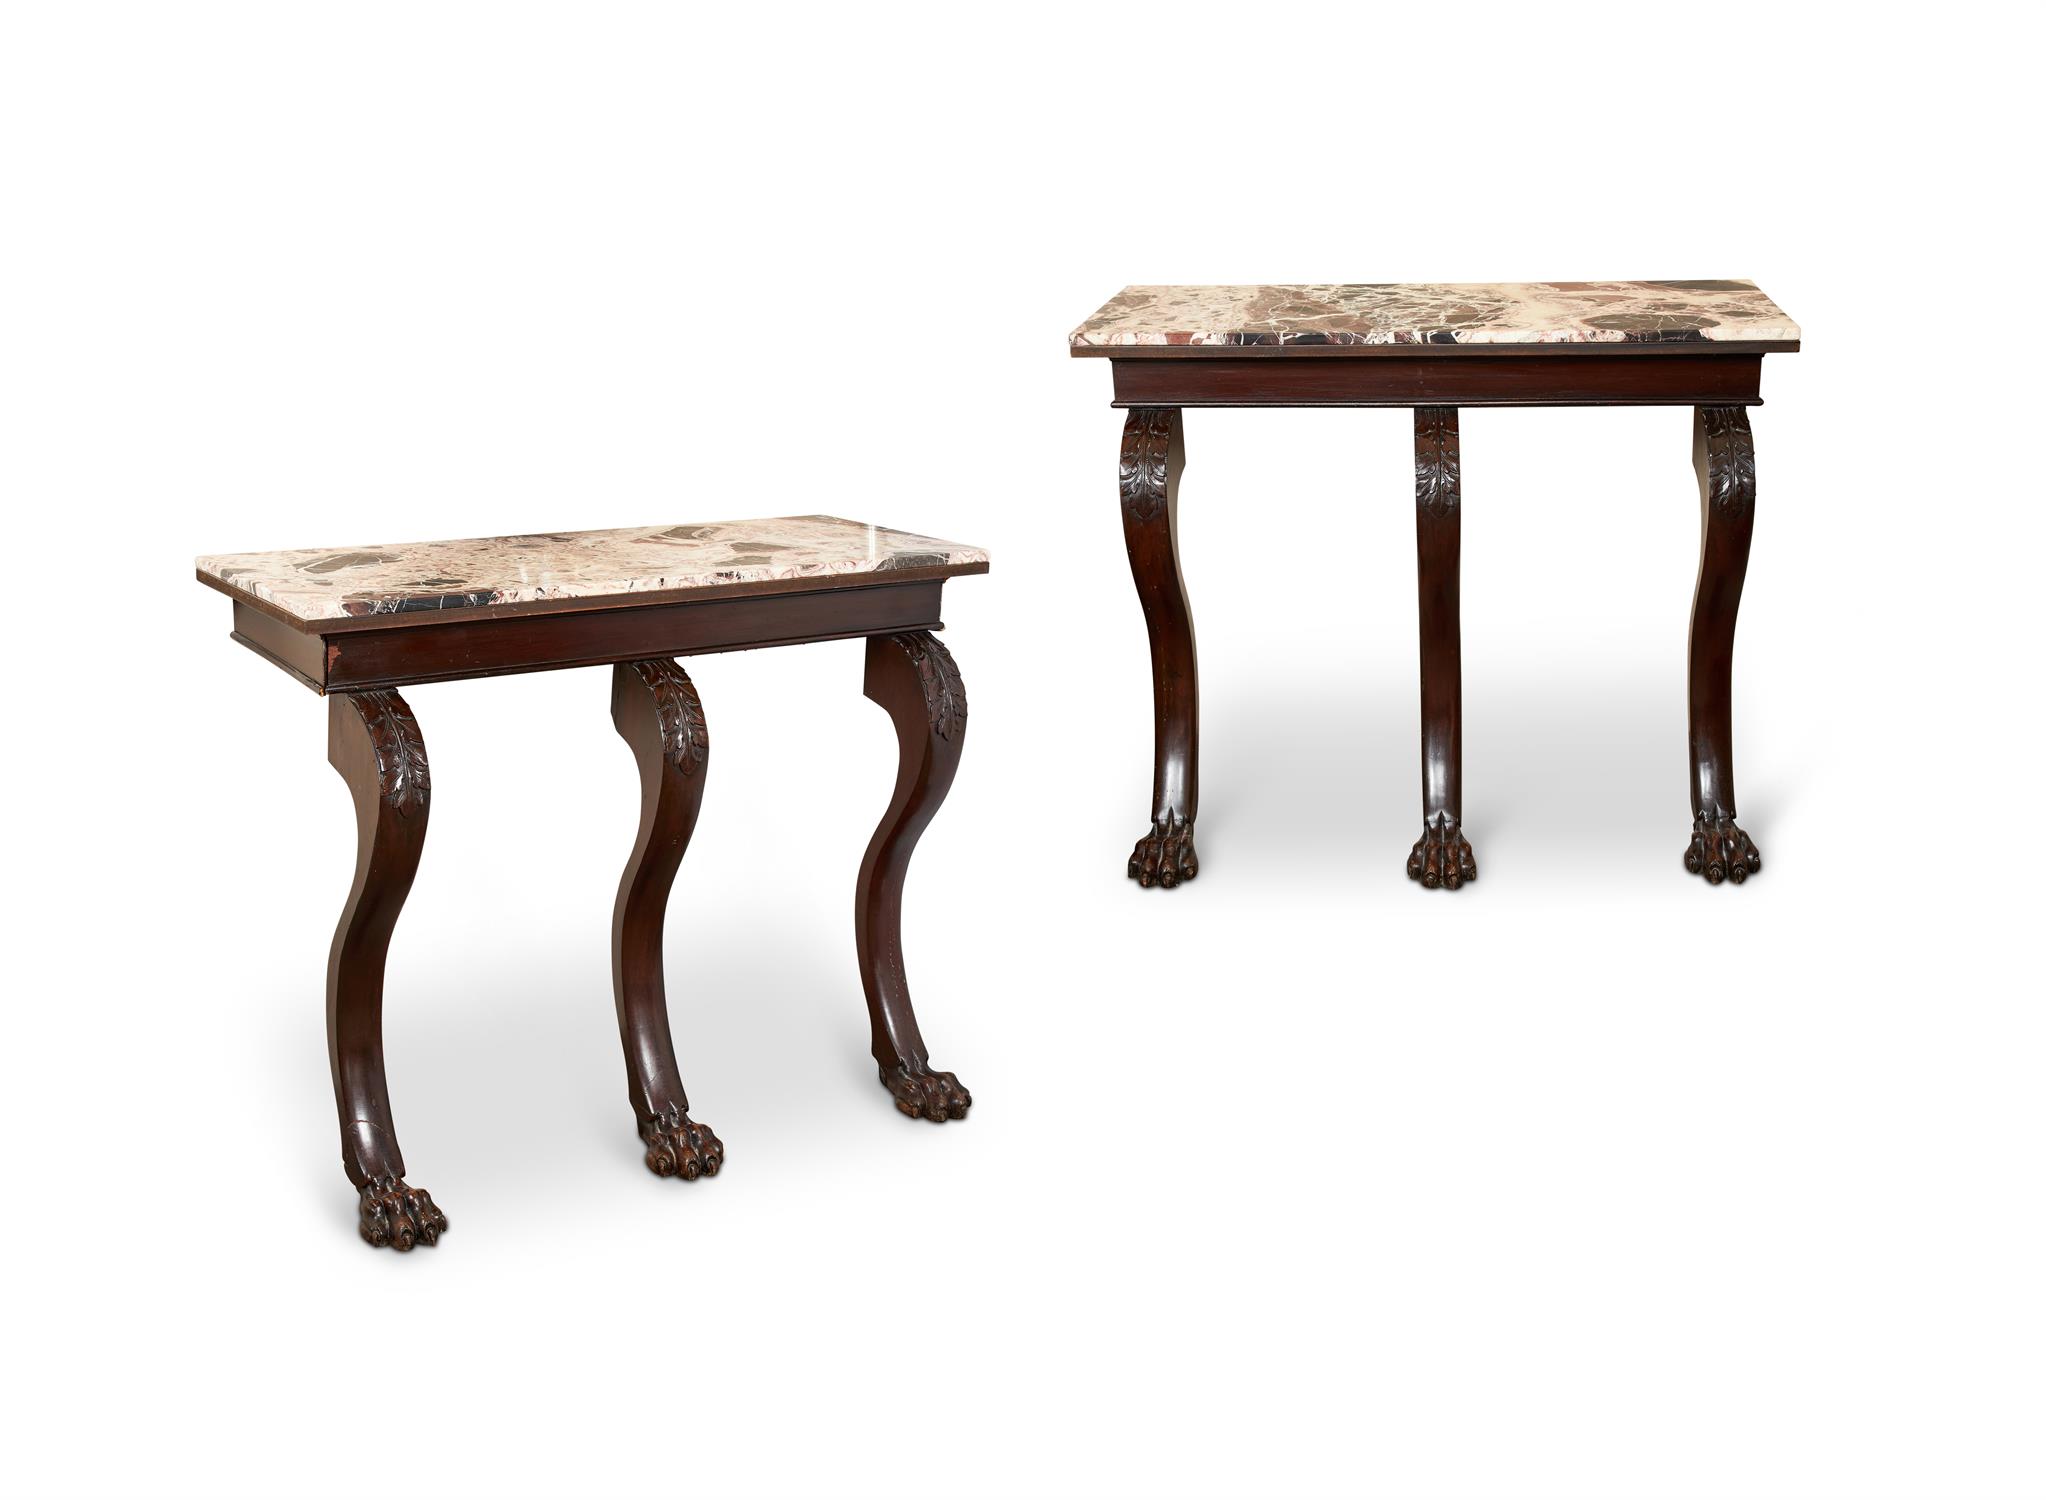 A PAIR OF MAHOGANY AND MARBLE TOPPED SIDE TABLES